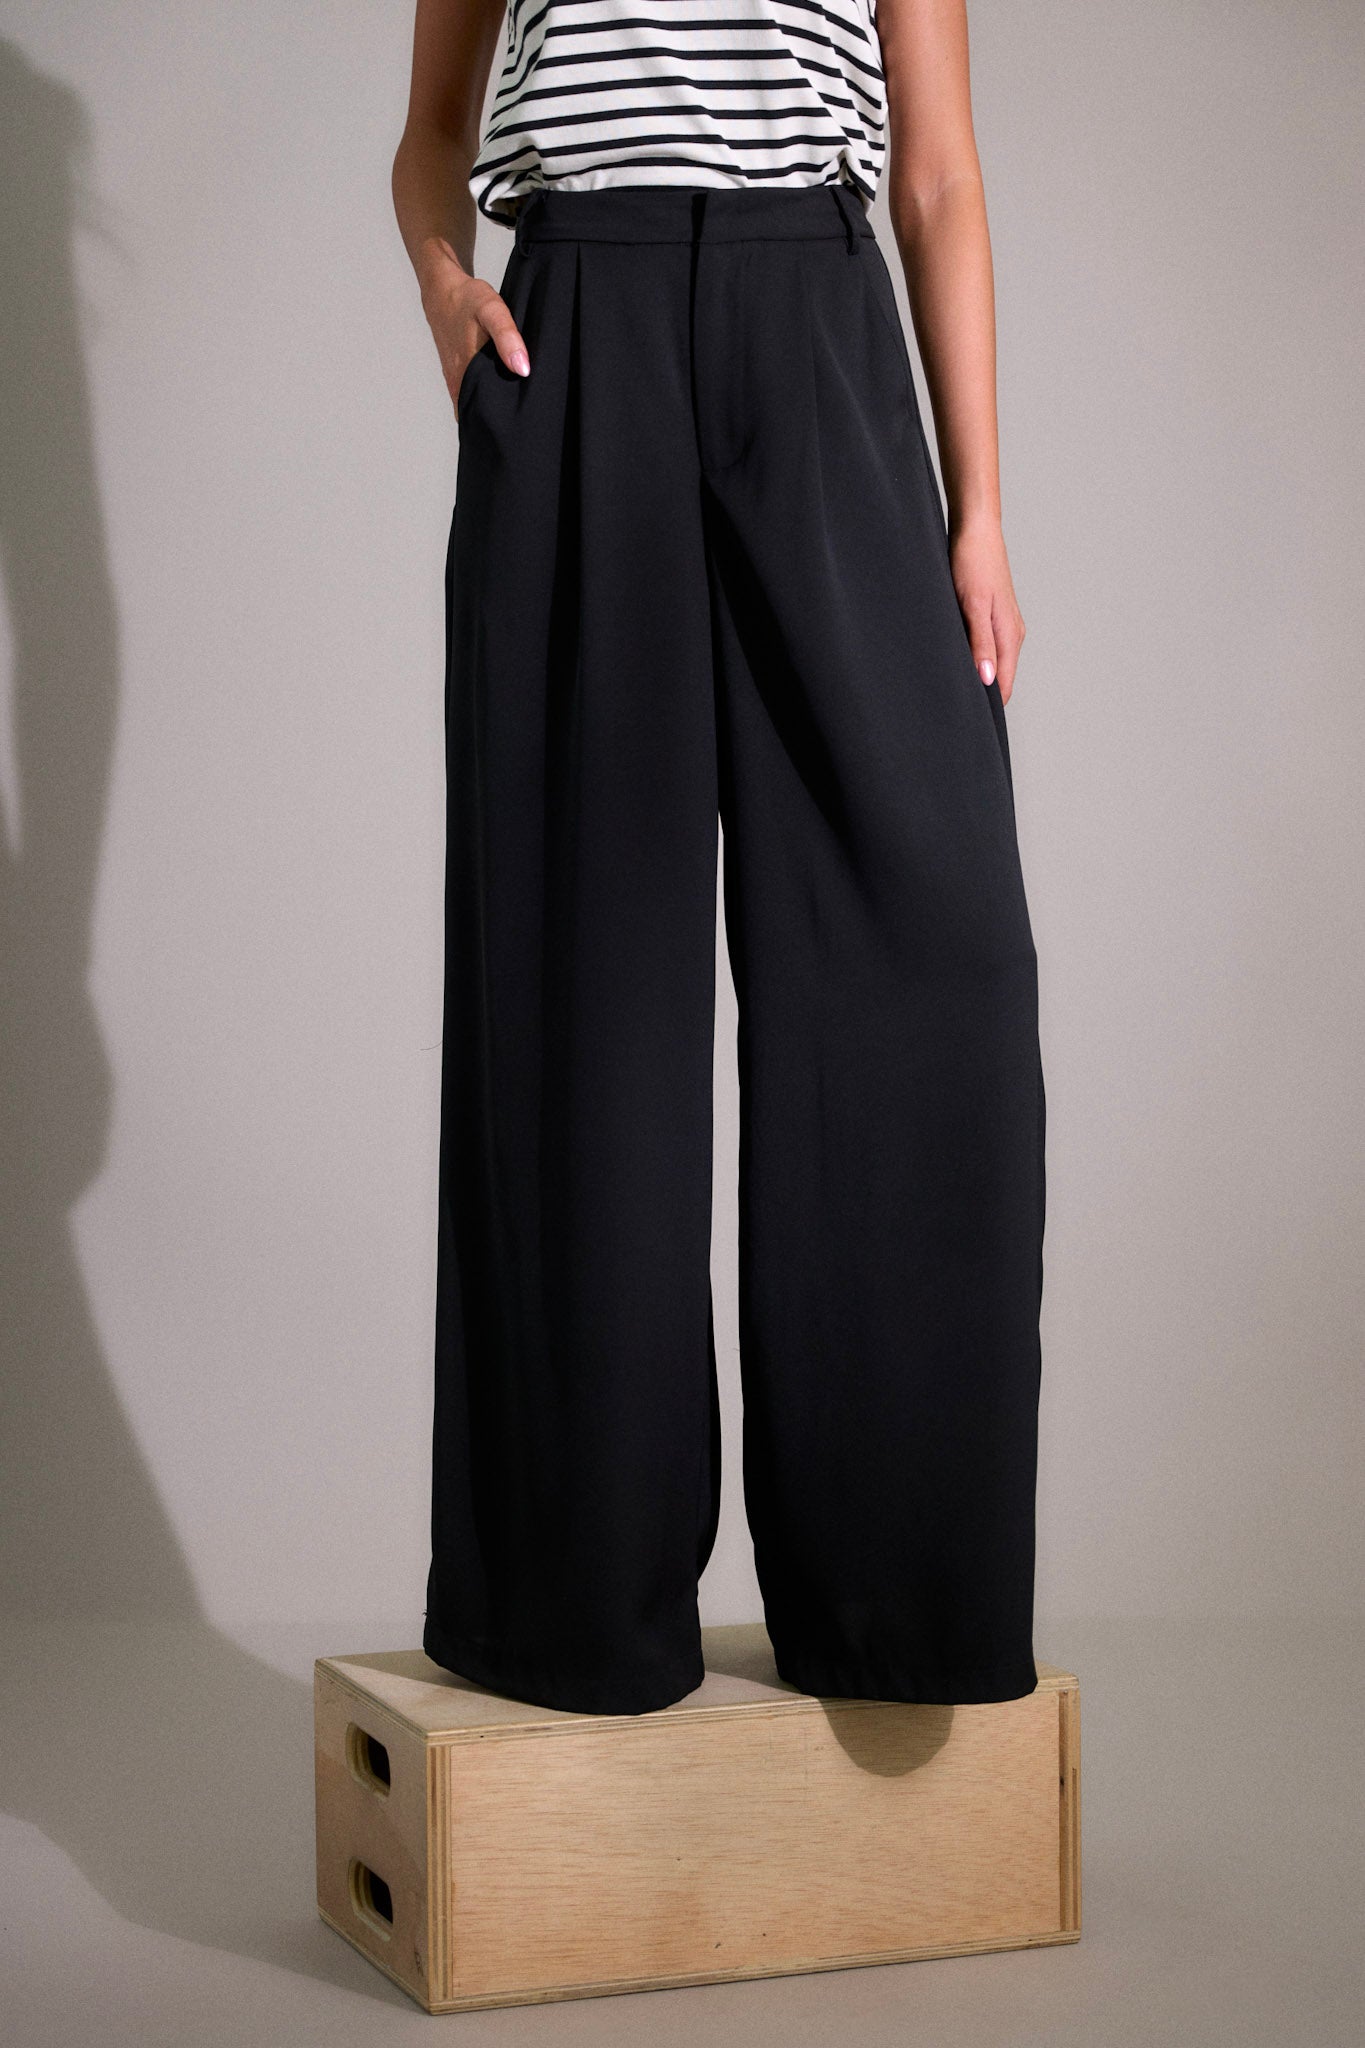 These black pants feature a high waist fit, a hook and bar closure, belt loops, pockets, and a wide leg.